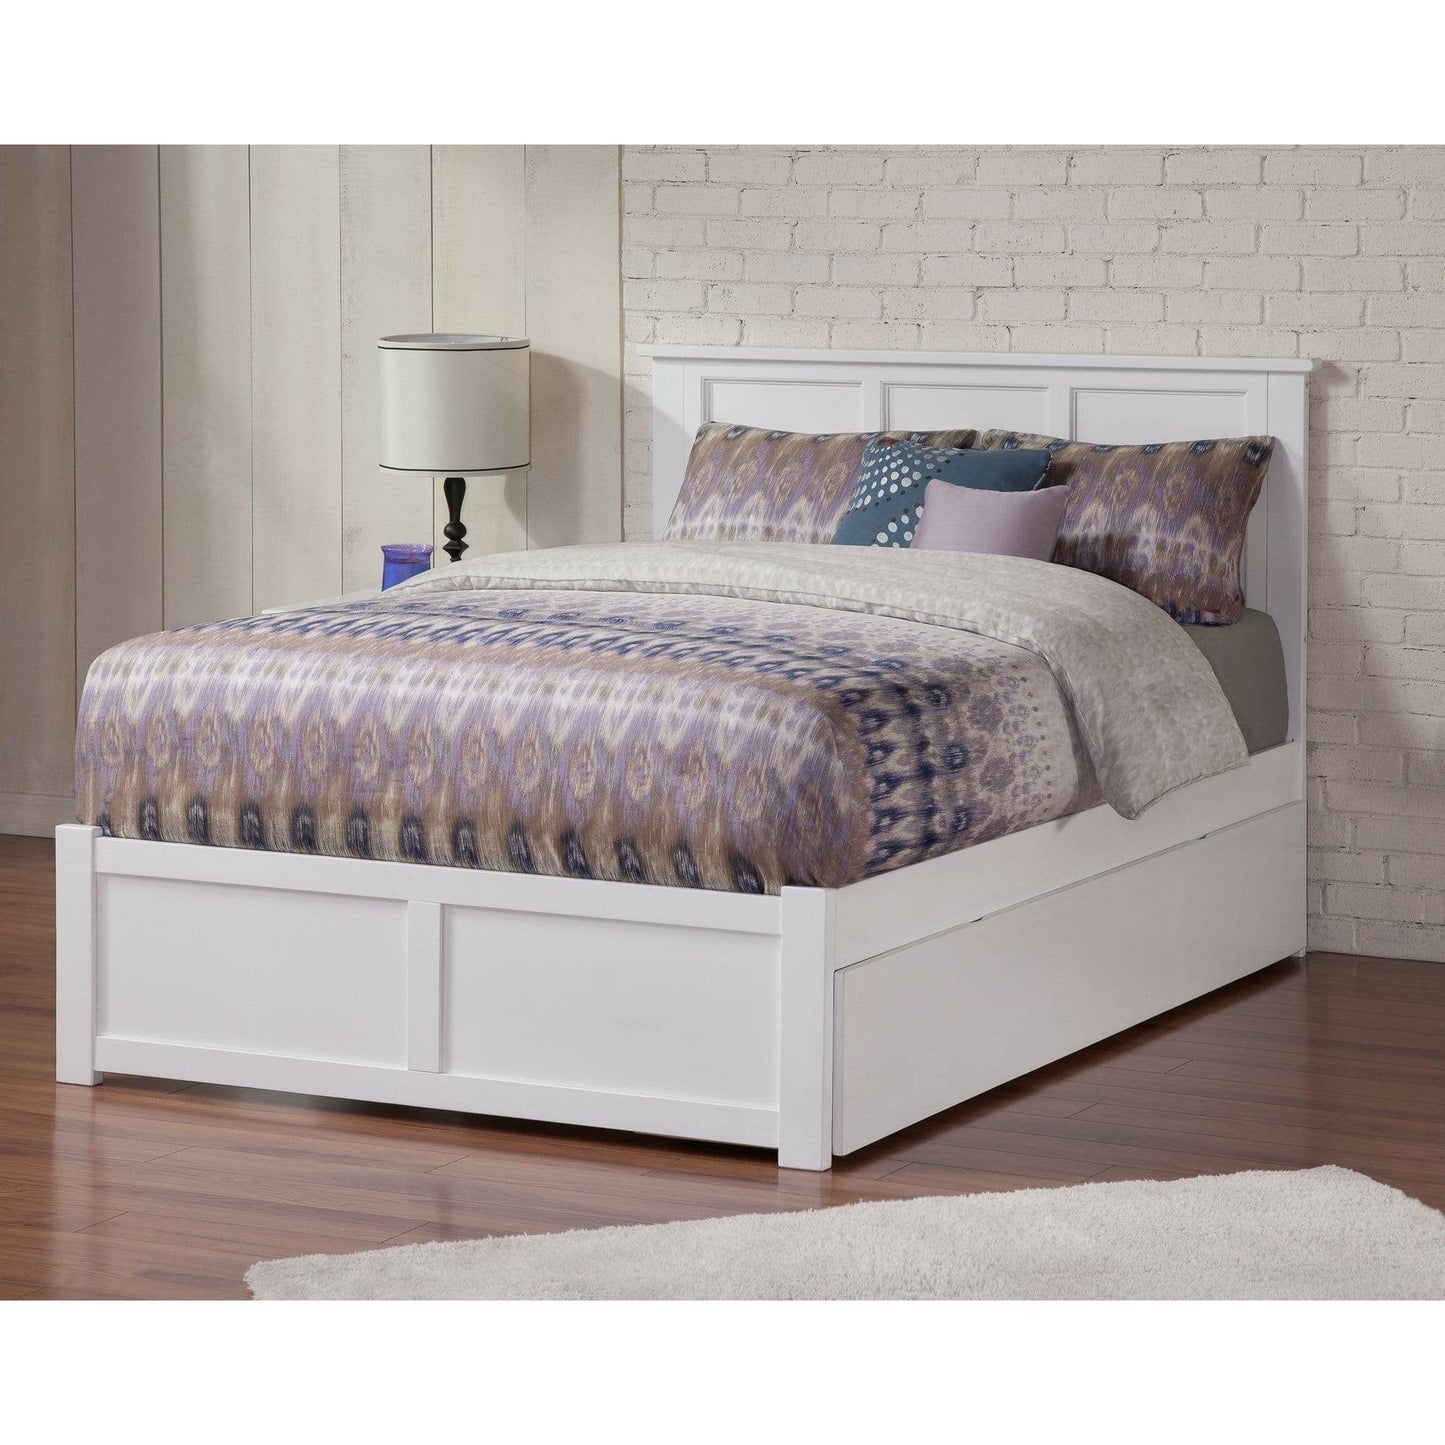 Atlantic Furniture Bed White Madison Full Platform Bed with Matching Foot Board with Full Size Urban Trundle Bed in Espresso